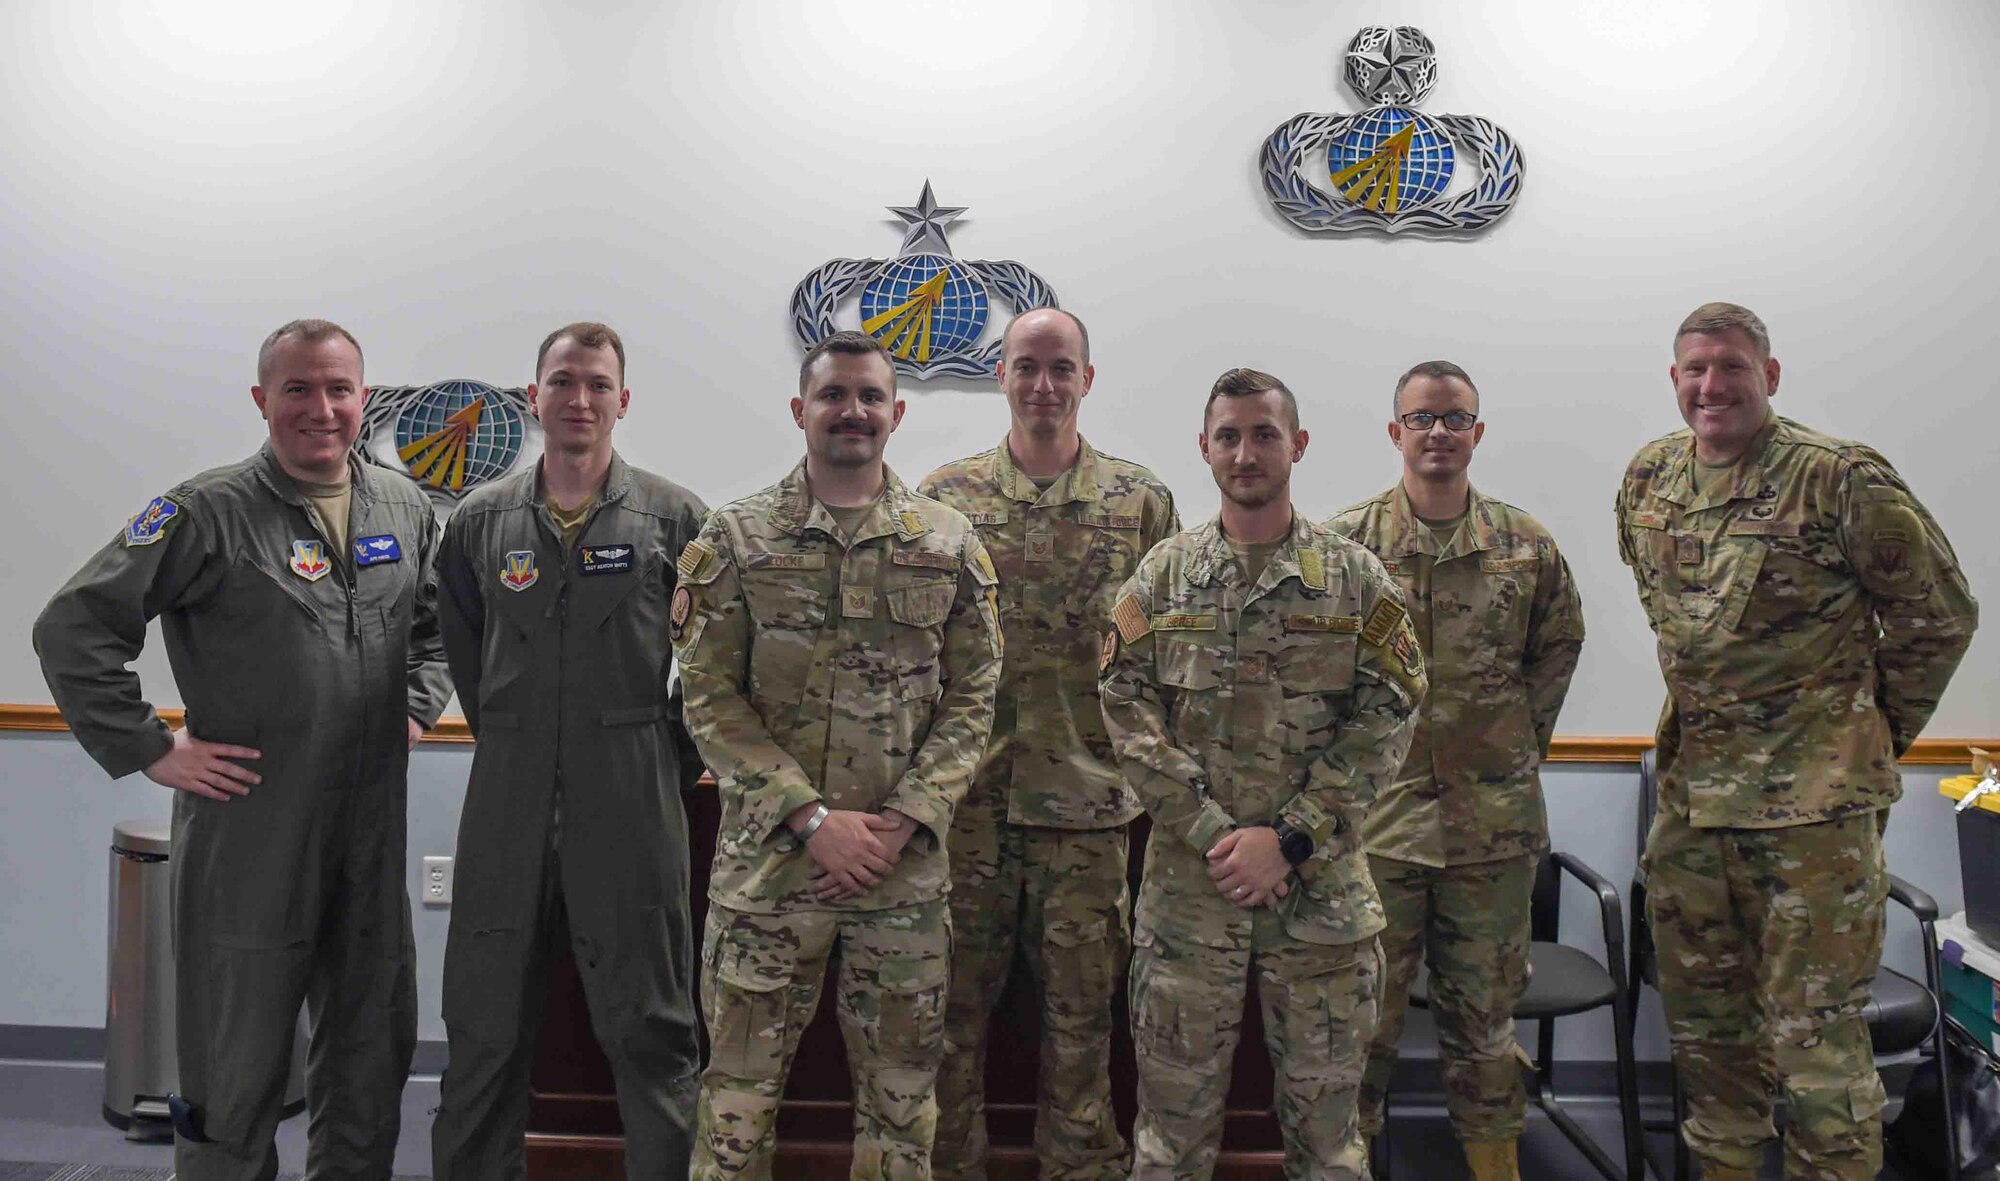 U.S. Air Force Col. Ryan Hayde, 23rd Wing vice commander, far left, and Chief Master Sgt. Justin Geers, 23rd Wing command chief, far right, stand with Spark Tank competition presenters at Moody Air Force Base, Georgia, March 24, 2023. The five finalists were selected from across the base to present ideas to the 23rd Wing Leadership and an innovation advisory panel. (U.S. Air Force photo by Airman 1st Class Briana Beavers)